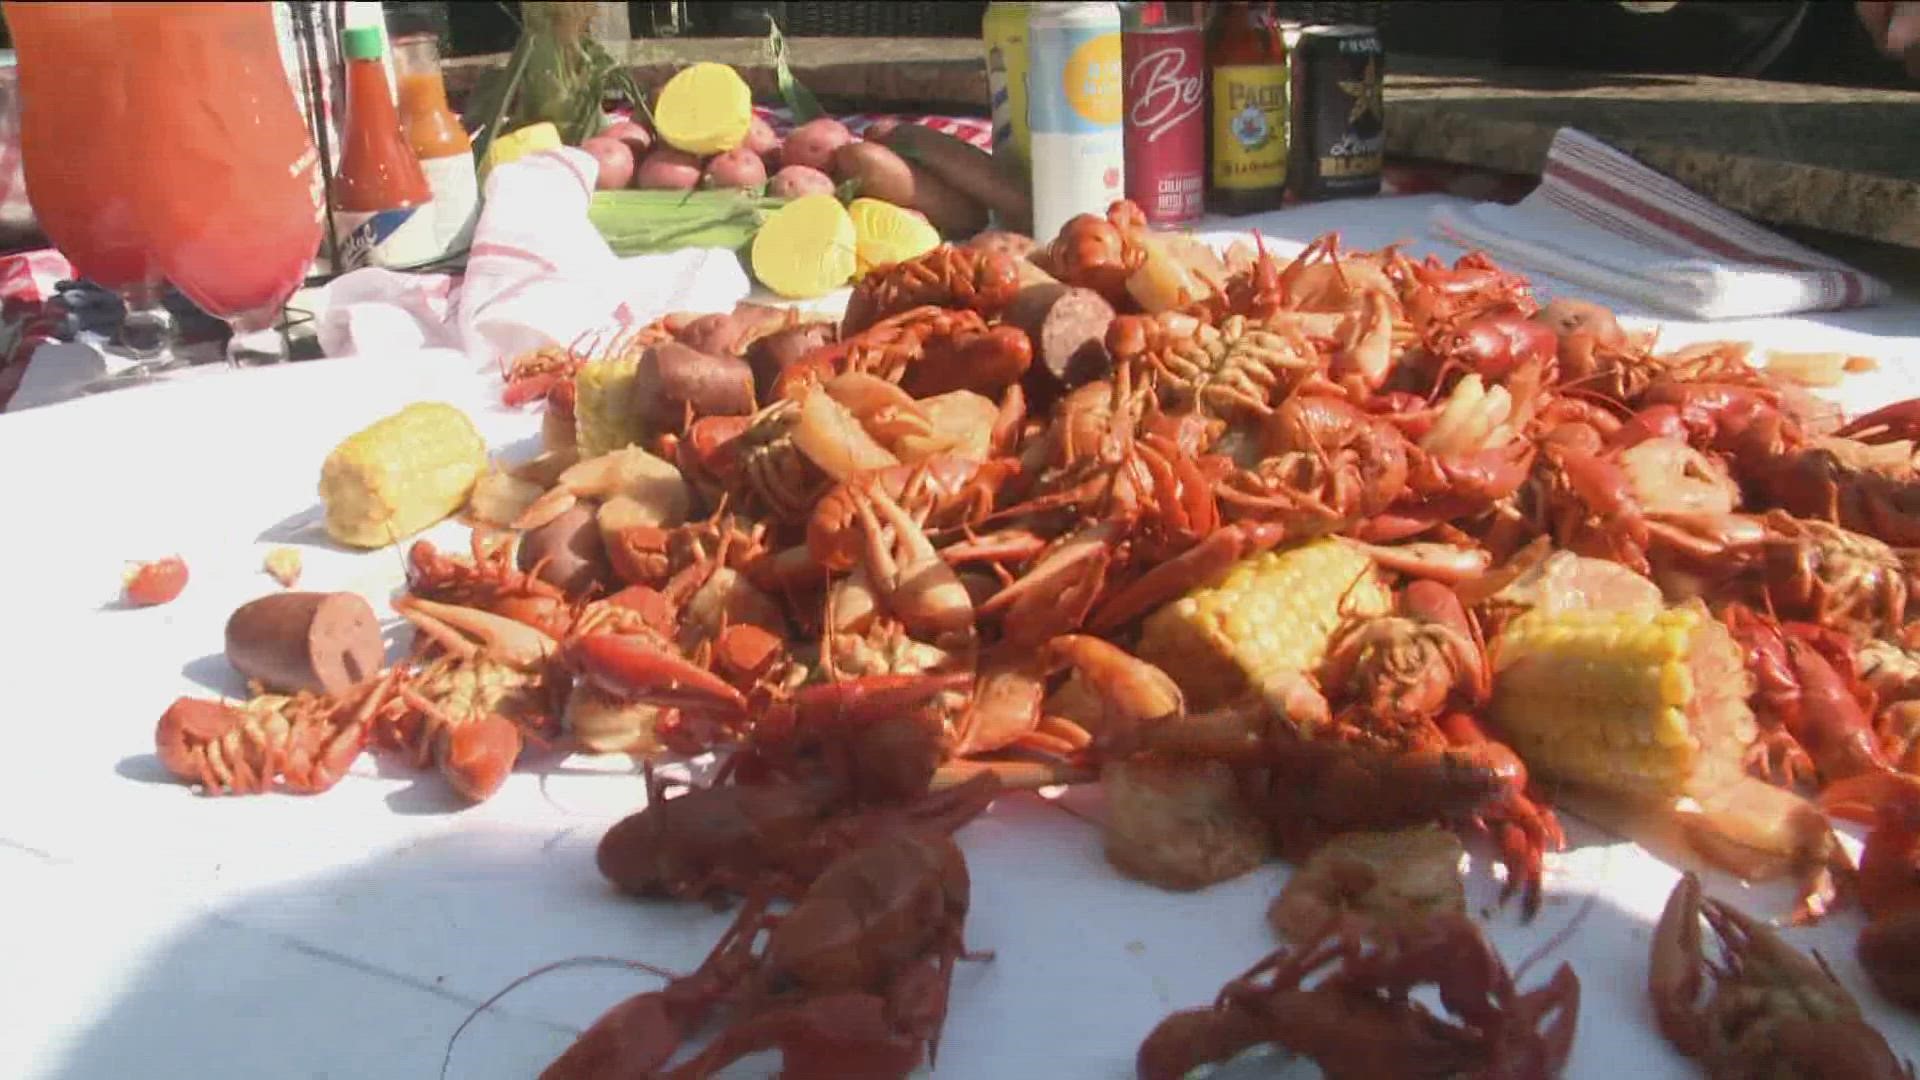 The event started as a way to further Smack Shack's sustainability mission, and to deplete the supply of invasive crayfish in Woman Lake in northern Minnesota.